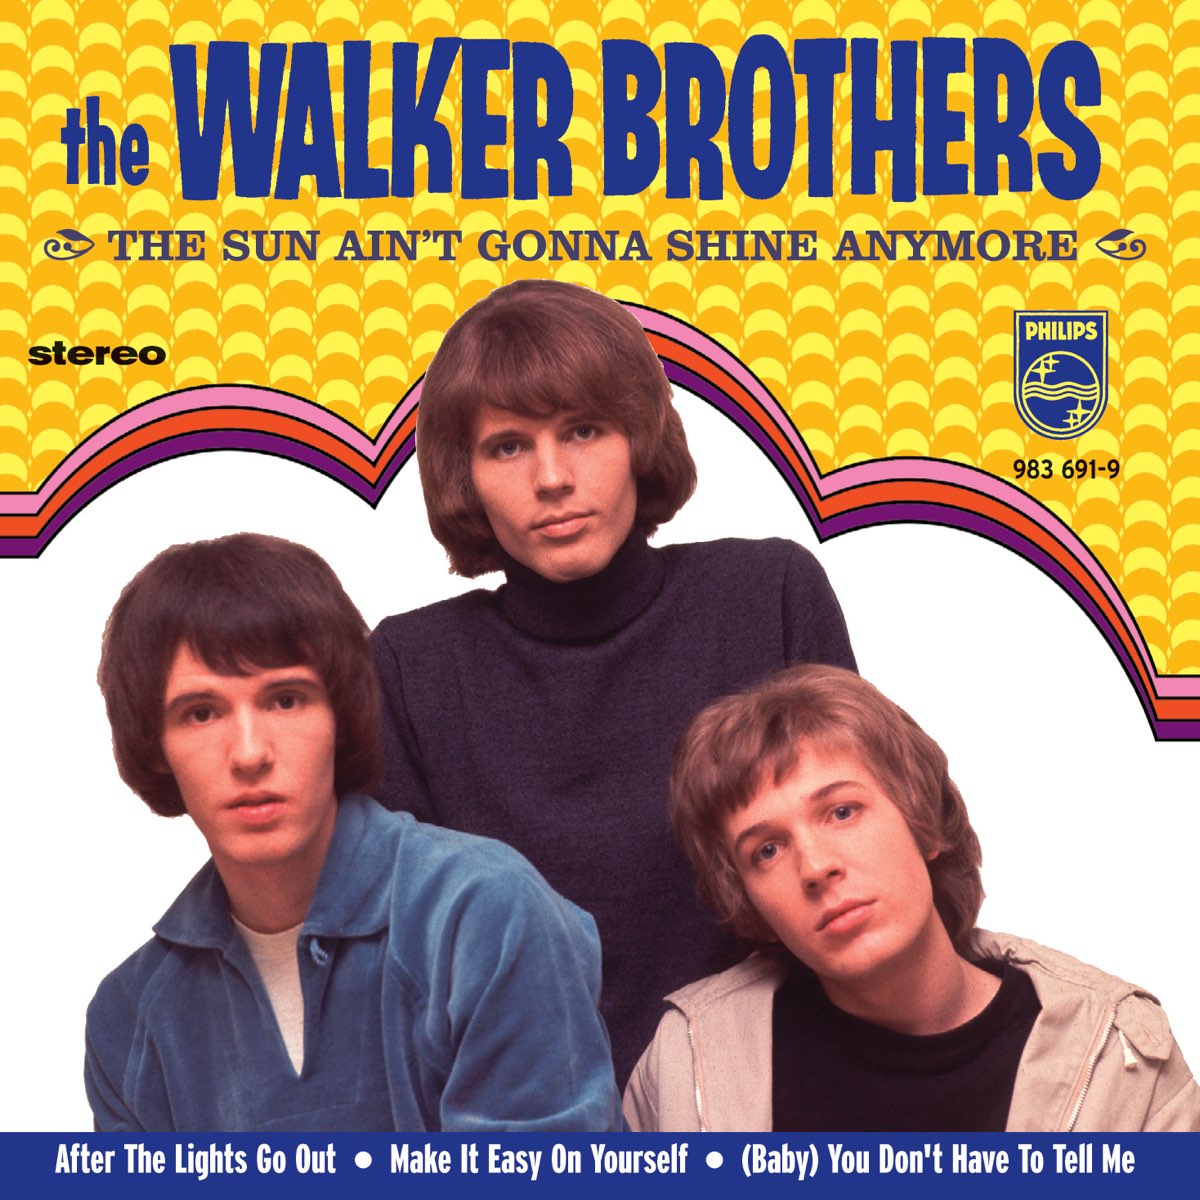 The Sun Ain't Gonna Shine Anymore - EP by The Walker Brothers on Apple Music